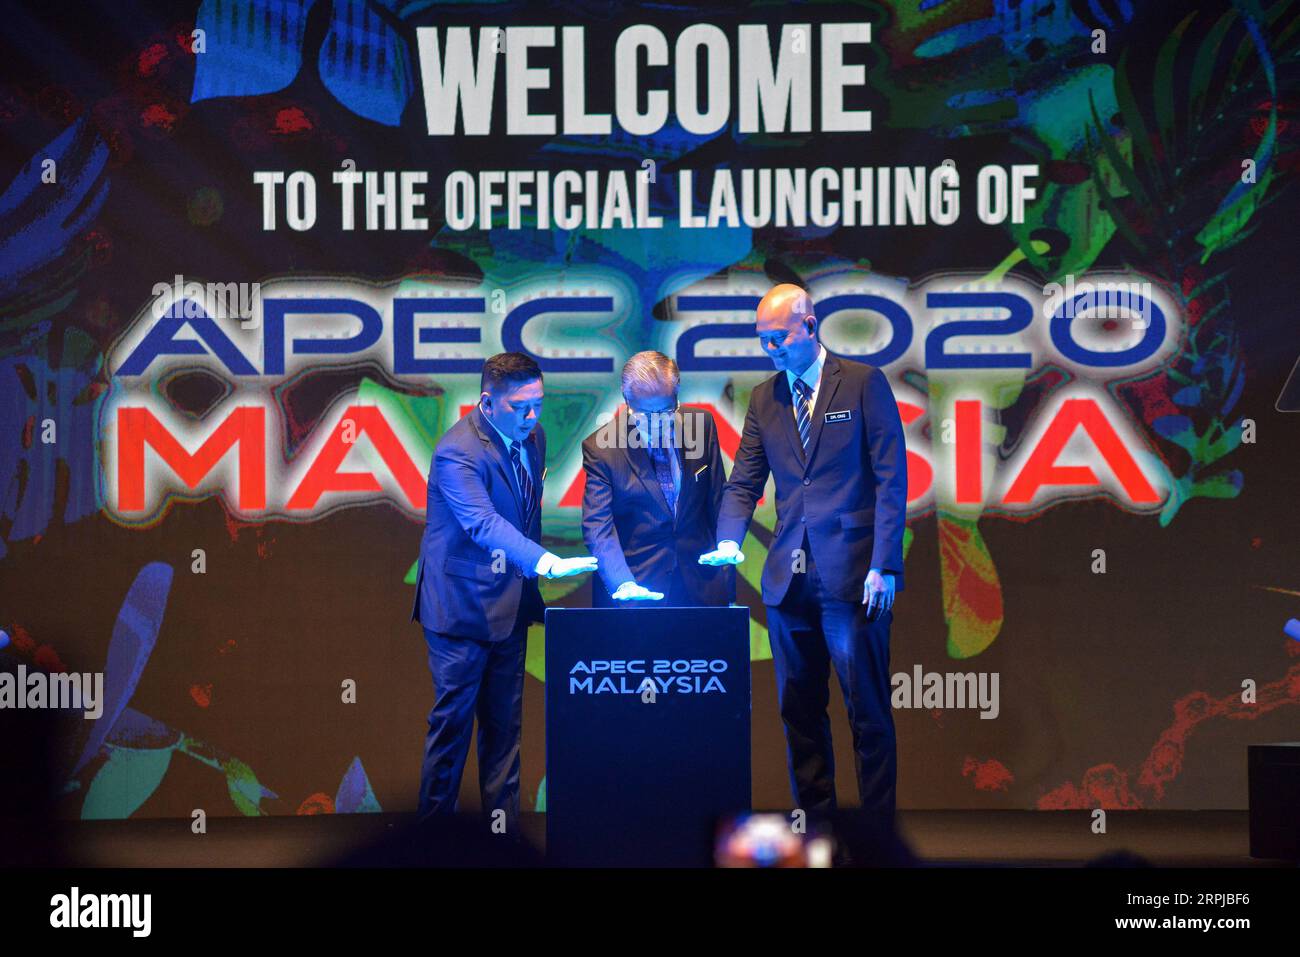 191204 -- CYBERJAYA, Dec. 4, 2019 Xinhua -- Malaysian Prime Minister Mahathir Mohamad C attends the launching ceremony of Malaysia s chairmanship of APEC in 2020 in Cyberjaya, Malaysia, Dec. 4, 2019. Malaysia will promote the principle of shared prosperity when taking over the chairmanship of Asia-Pacific Economic Cooperation APEC in 2020, Prime Minister Mahathir Mohamad said Wednesday. Xinhua/Chong Voon Chung MALAYSIA-CYBERJAYA-APEC CHAIRMANSHIP-LAUNCHING CEREMONY PUBLICATIONxNOTxINxCHN Stock Photo